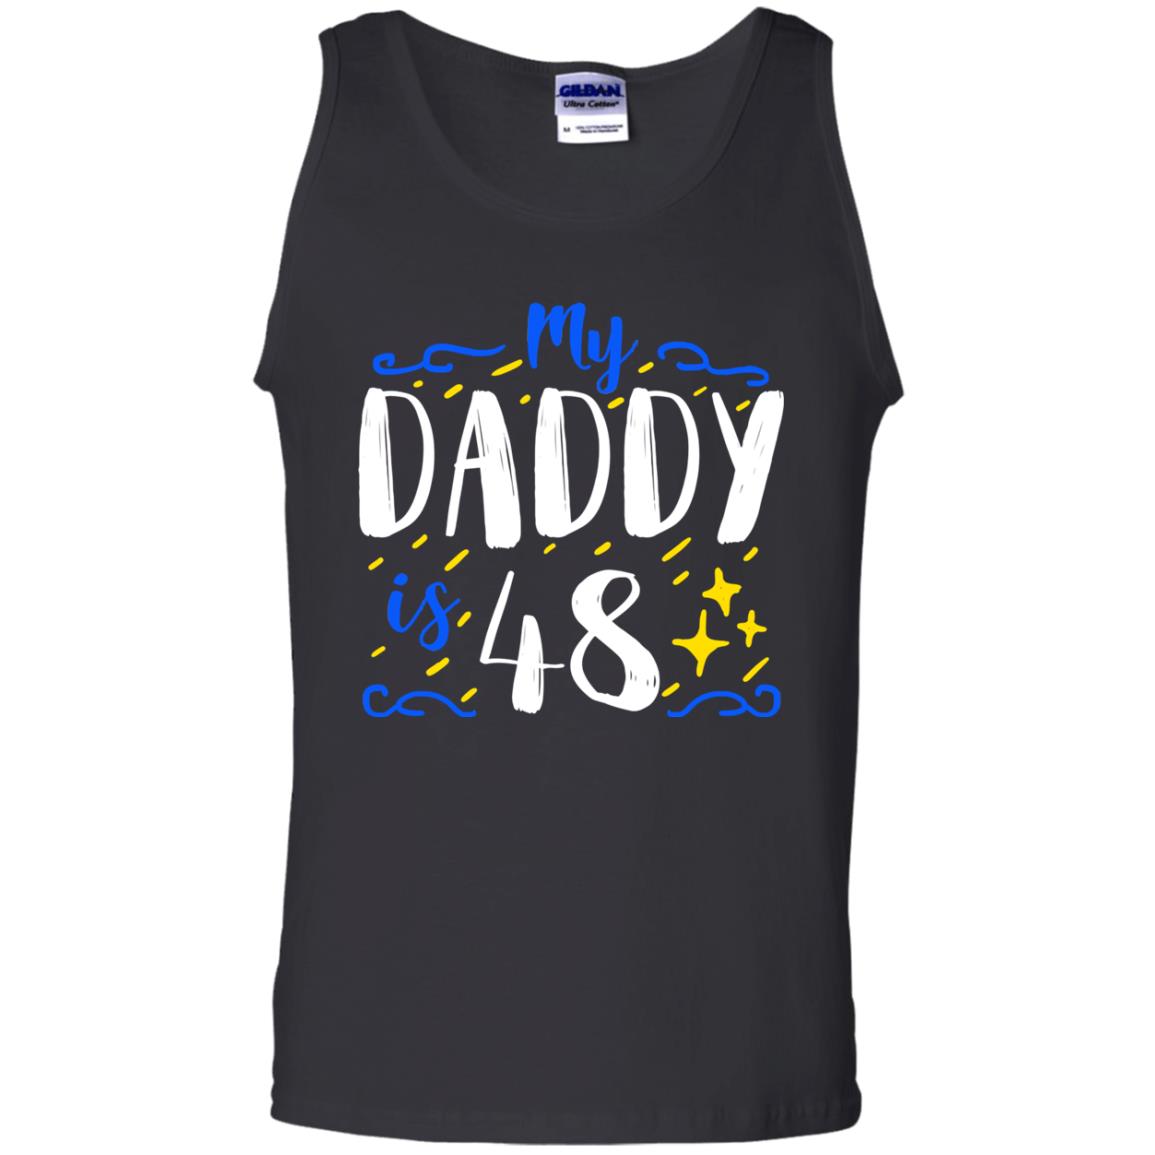 My Daddy Is 48 48th Birthday Daddy Shirt For Sons Or DaughtersG220 Gildan 100% Cotton Tank Top